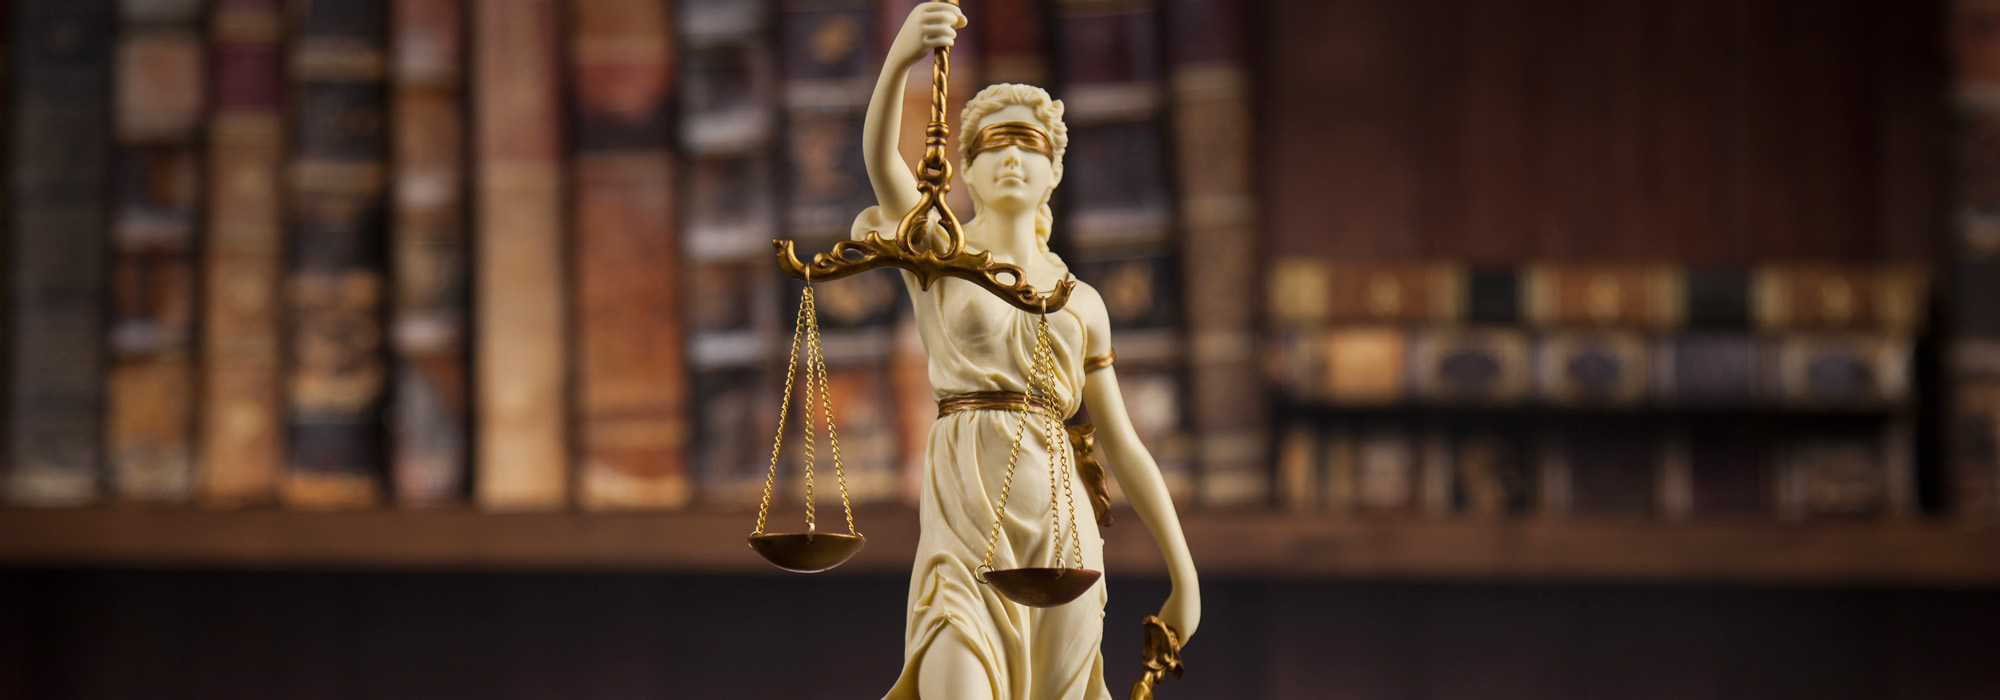 judge gavel and scales of justice and book background